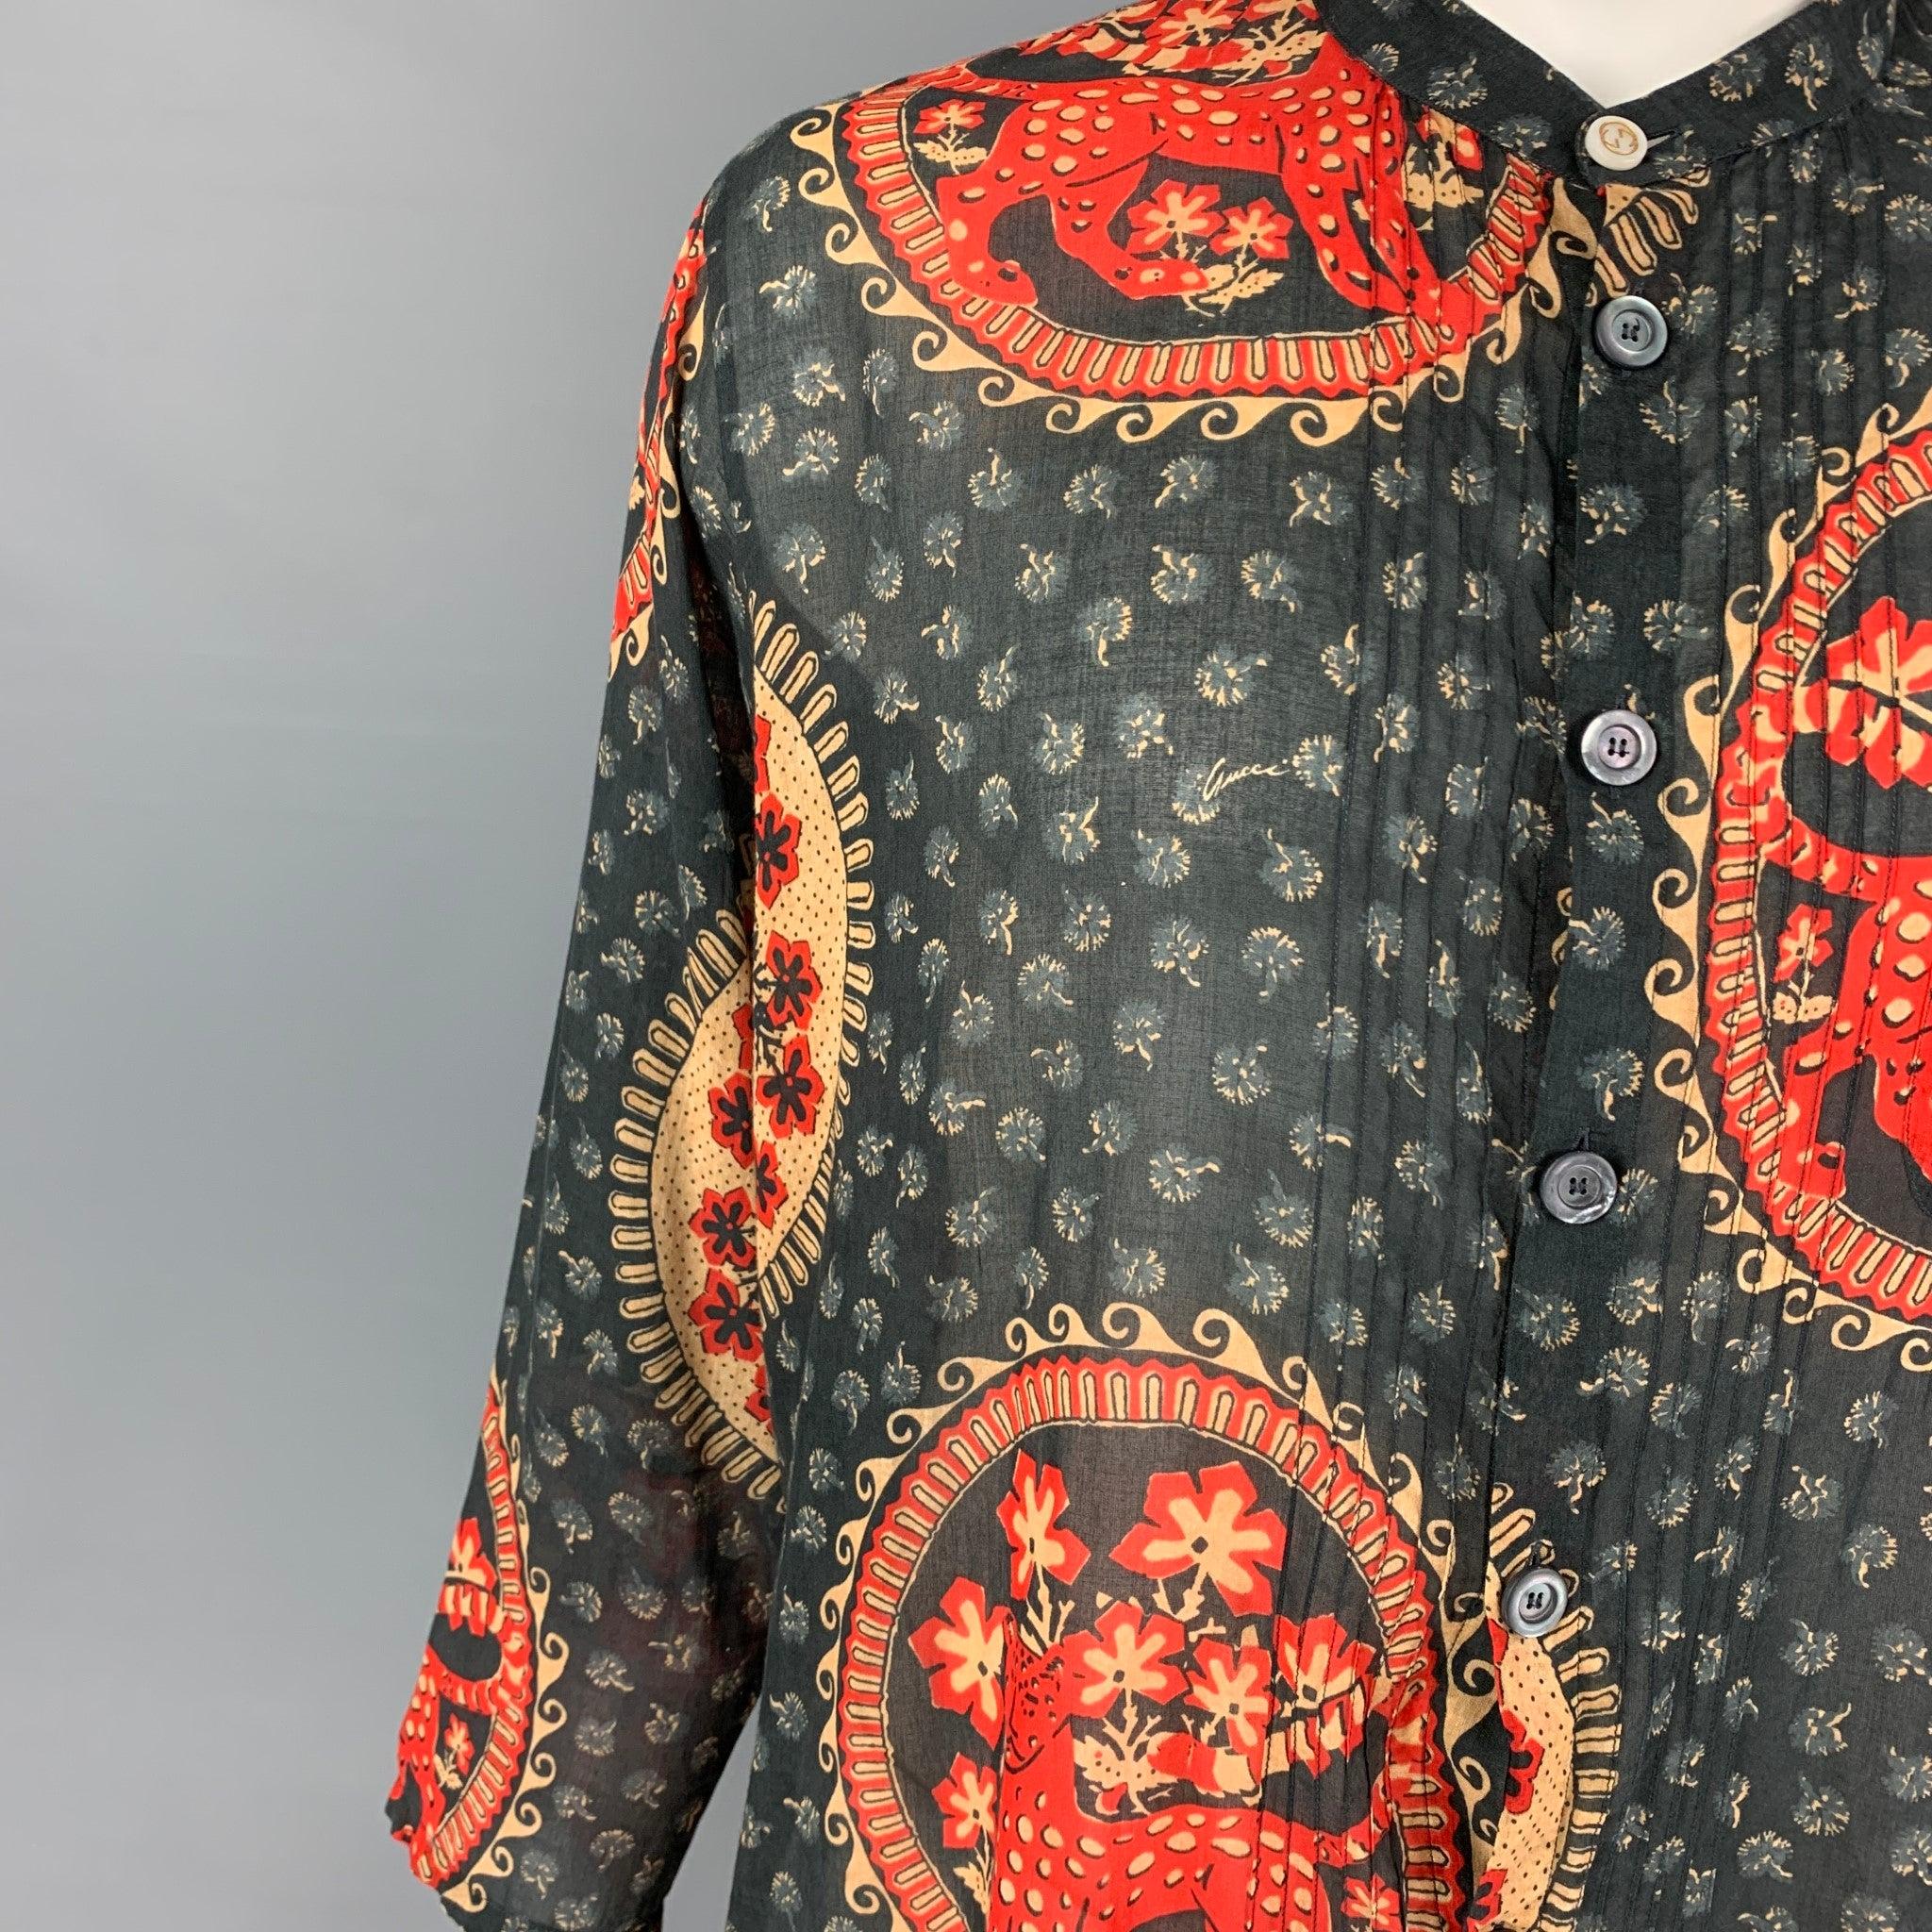 GUCCI long sleeve shirt comes in a gray cotton with a red & khaki print featuring a loose fit, nehru collar, pleated, logo button detail, patch pocket, and a buttoned closure. Made in Italy.
Excellent
Pre-Owned Condition. 

Marked:   52 